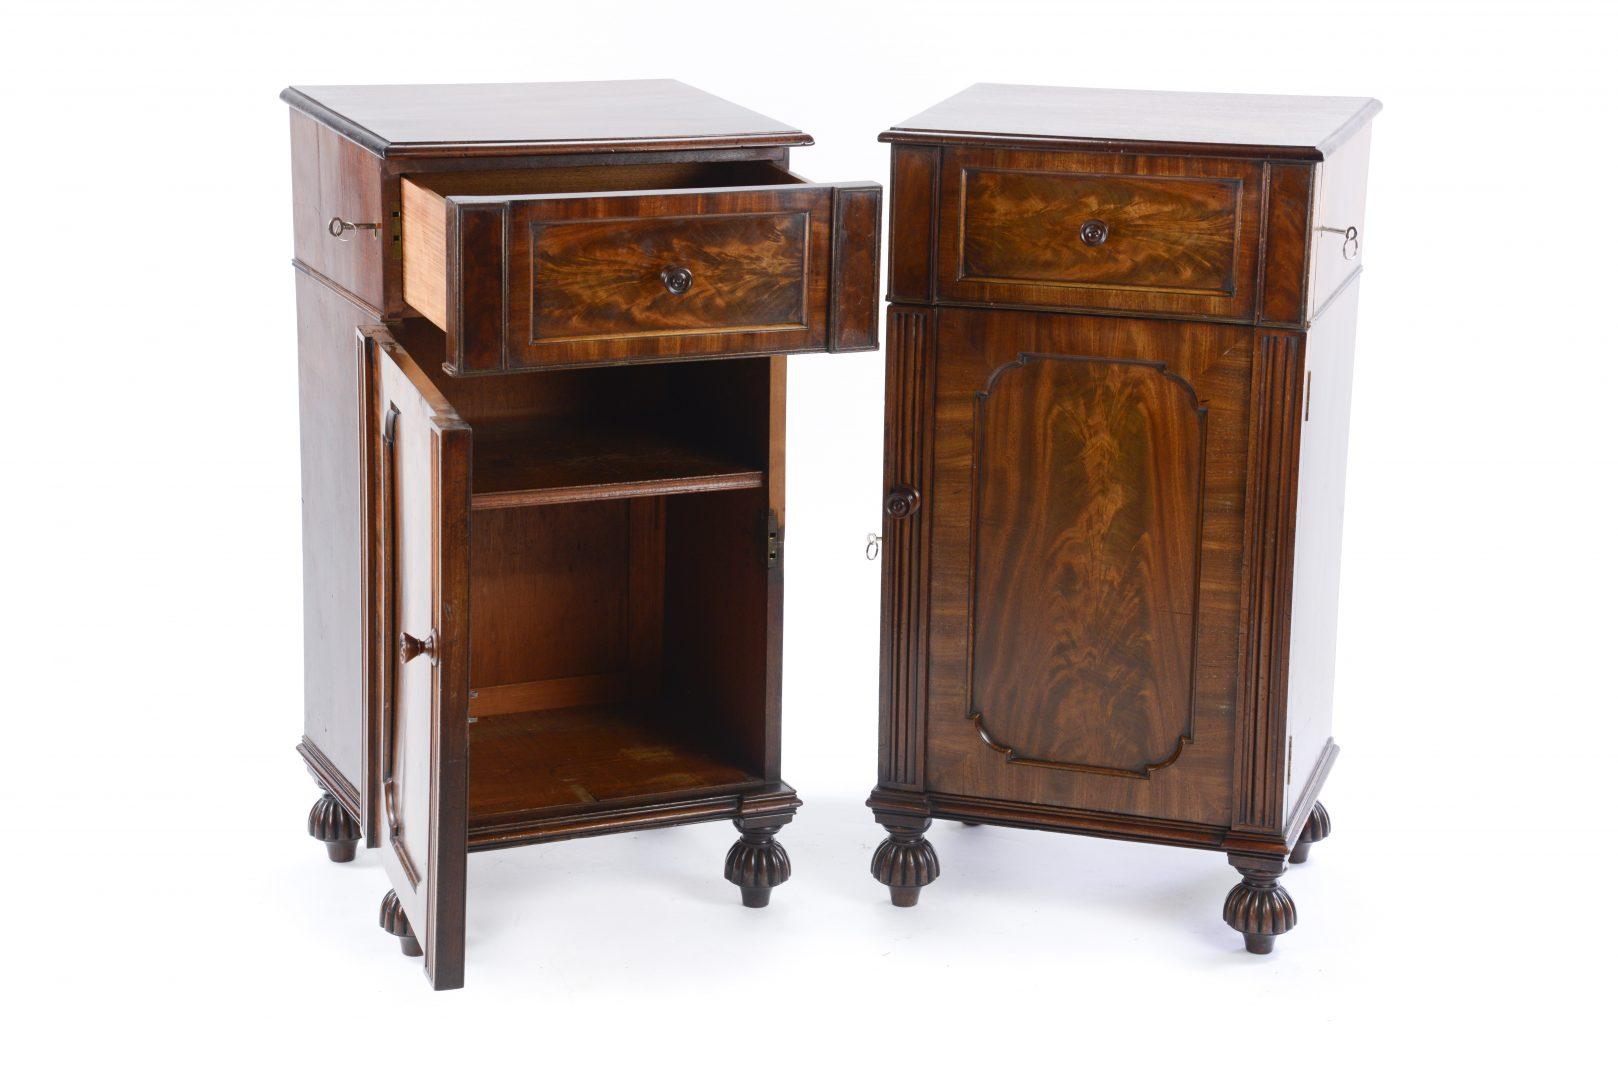 British Pair of William IV Mahogany Pedestal Cupboards in the Manner of Gillows